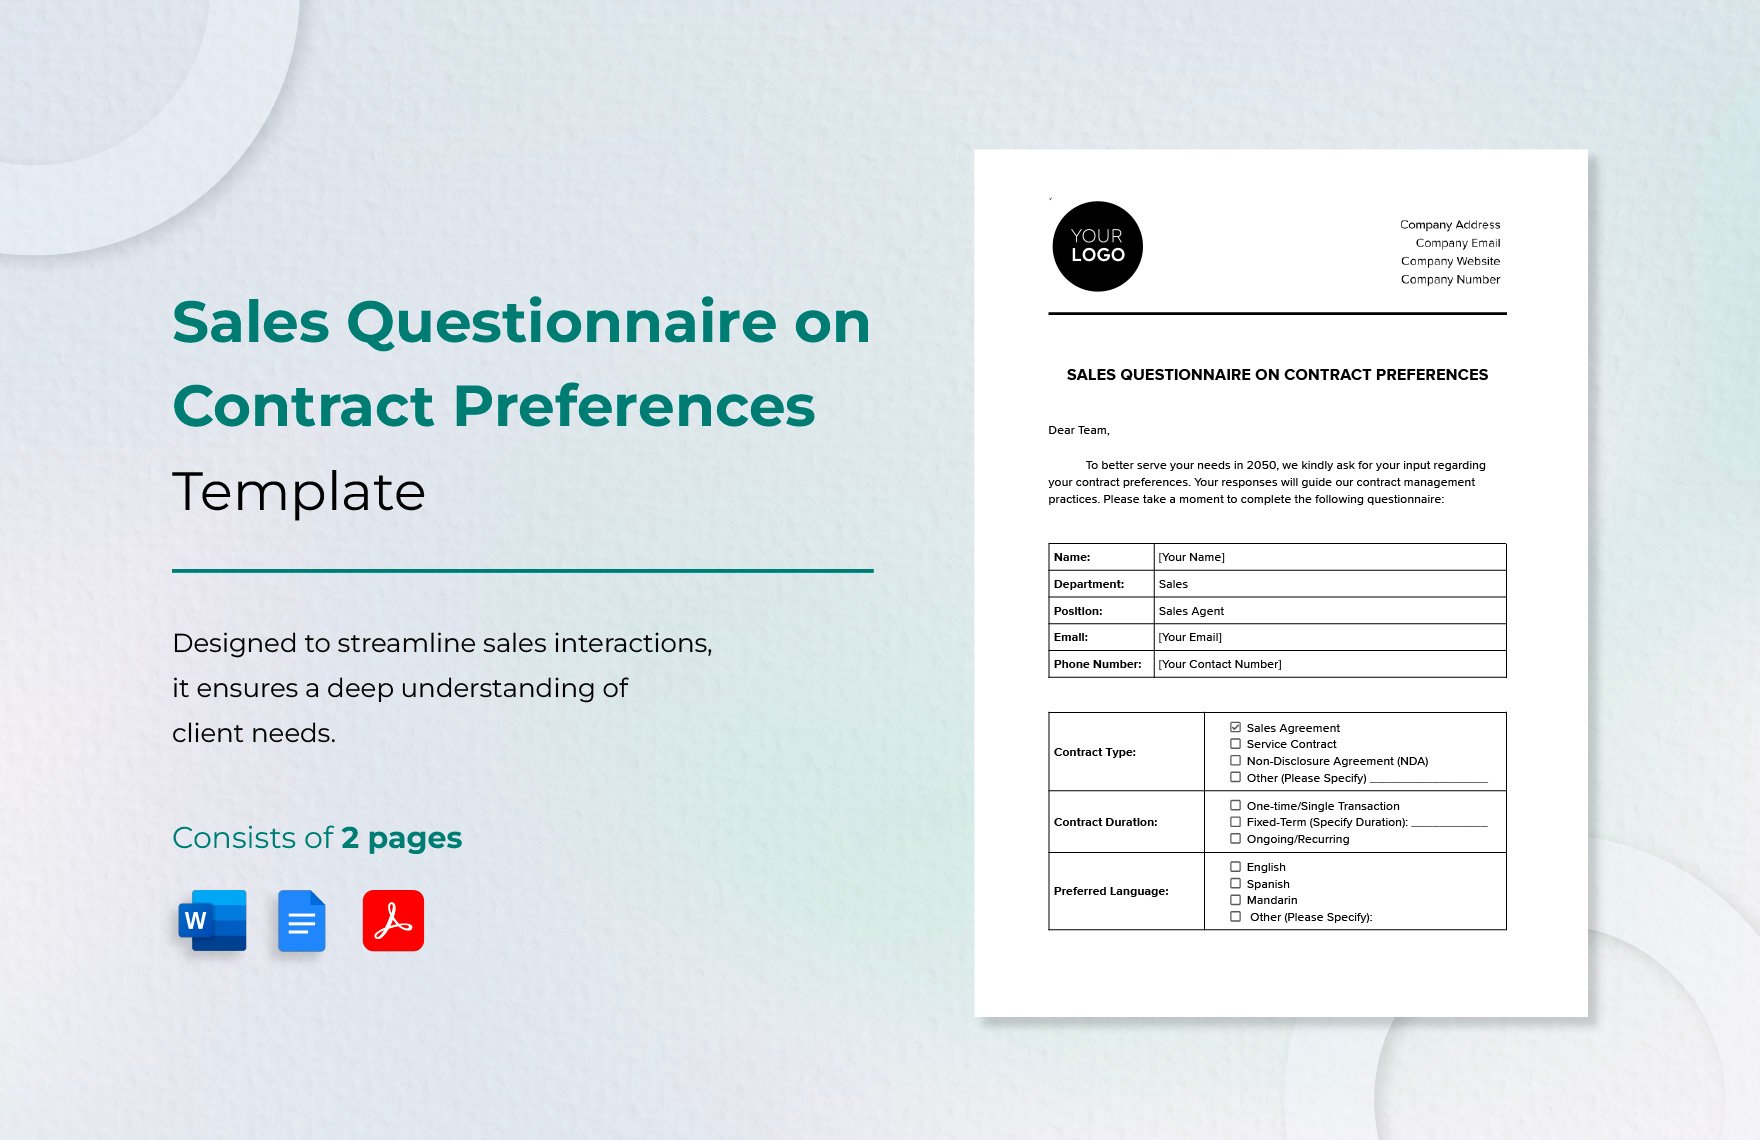 Sales Questionnaire on Contract Preferences Template